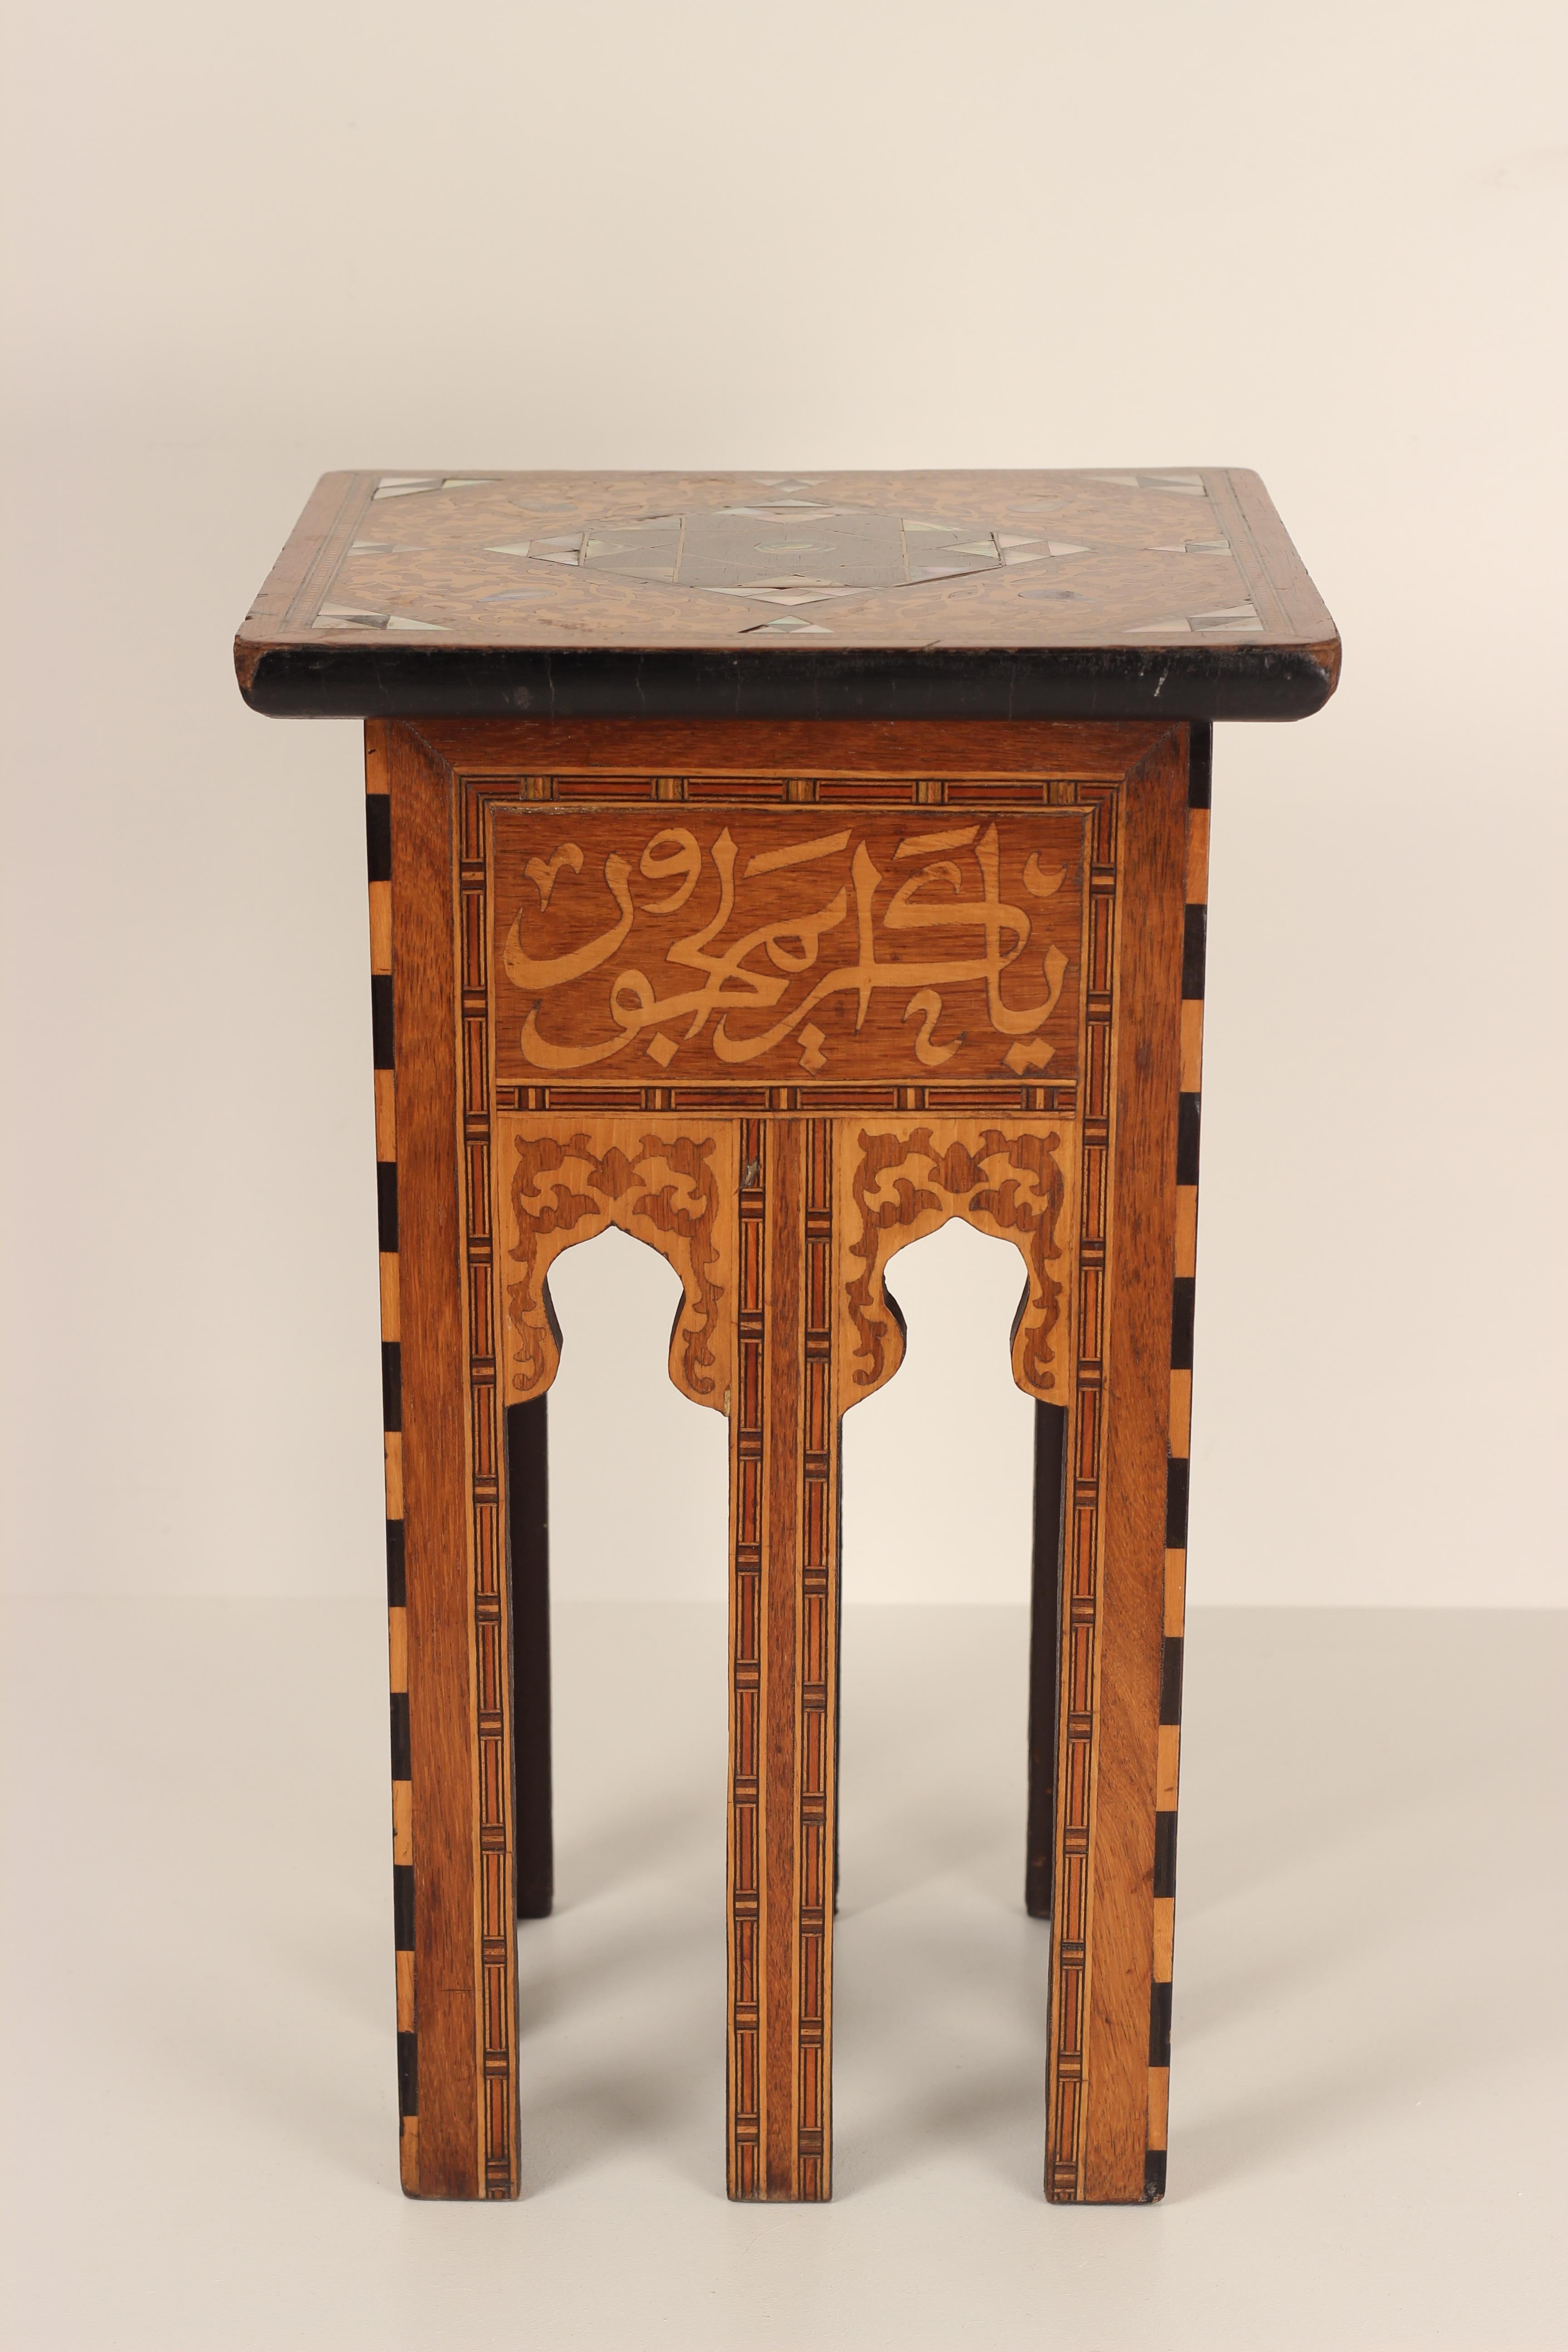 Syrian Boho Chic Style 20th Century Mother of Pearl and Wooden Inlay Liberty & Co Table